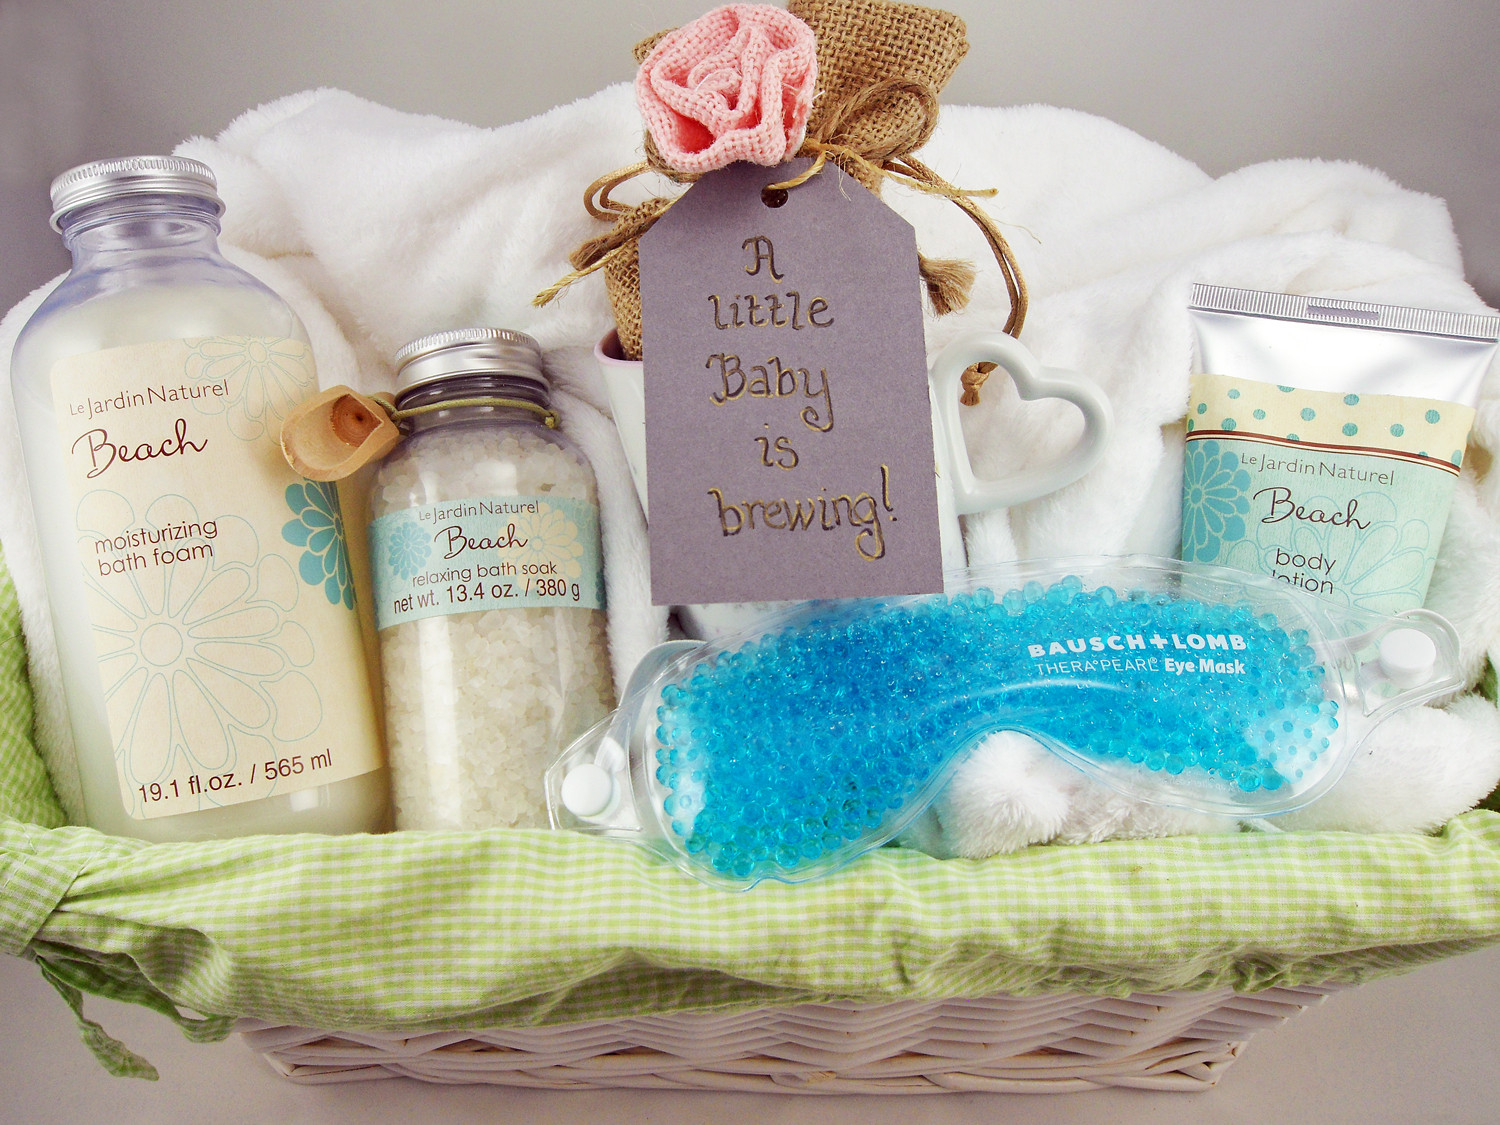 Baby Personalized Gifts
 Expecting Couples Love These Unique Personalized Baby Gifts